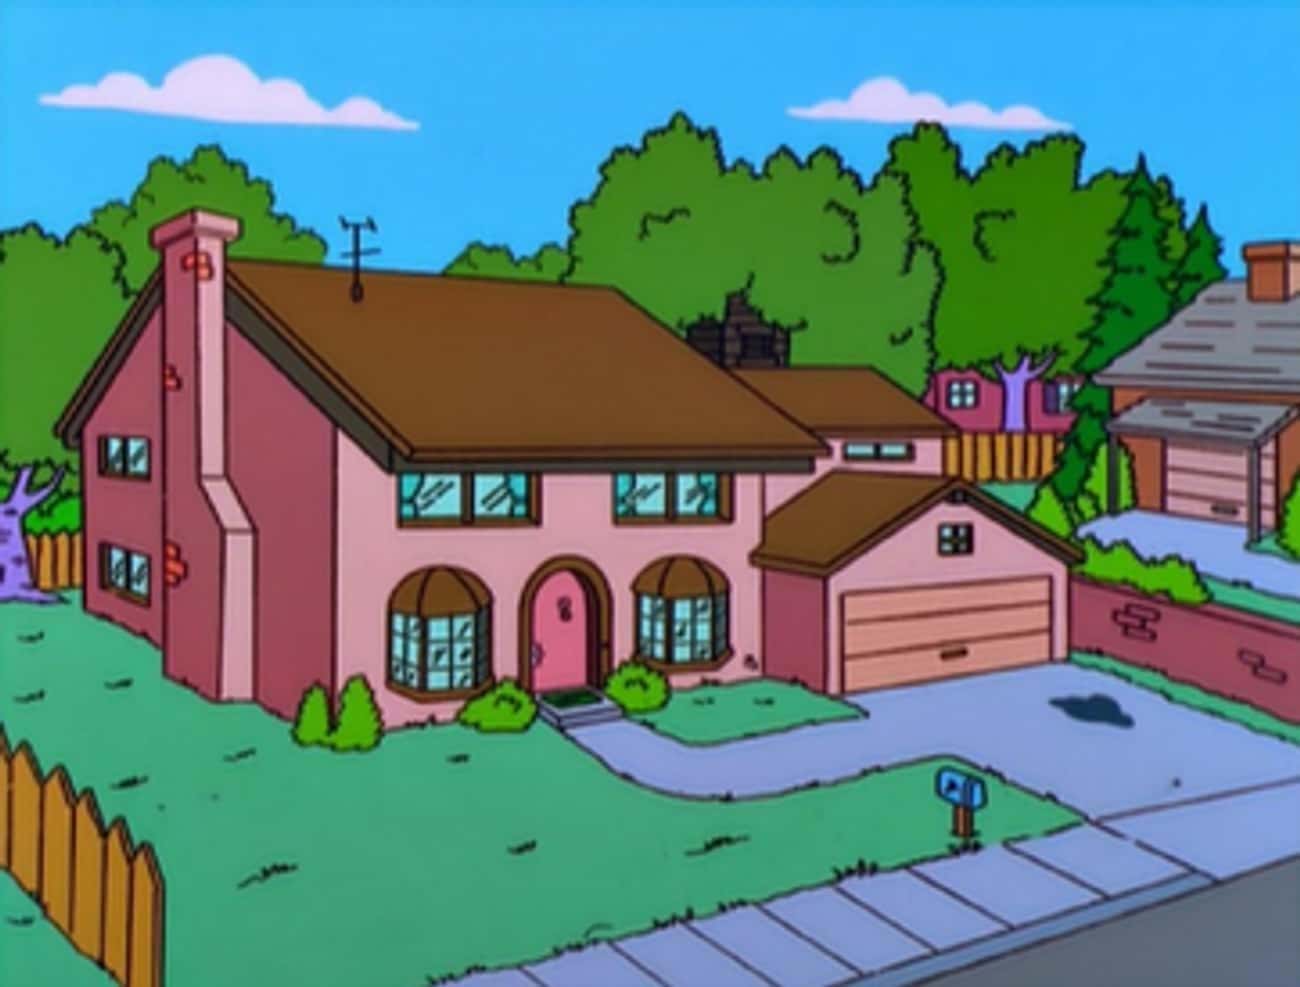 742 Evergreen Terrace - 'The Simpsons'